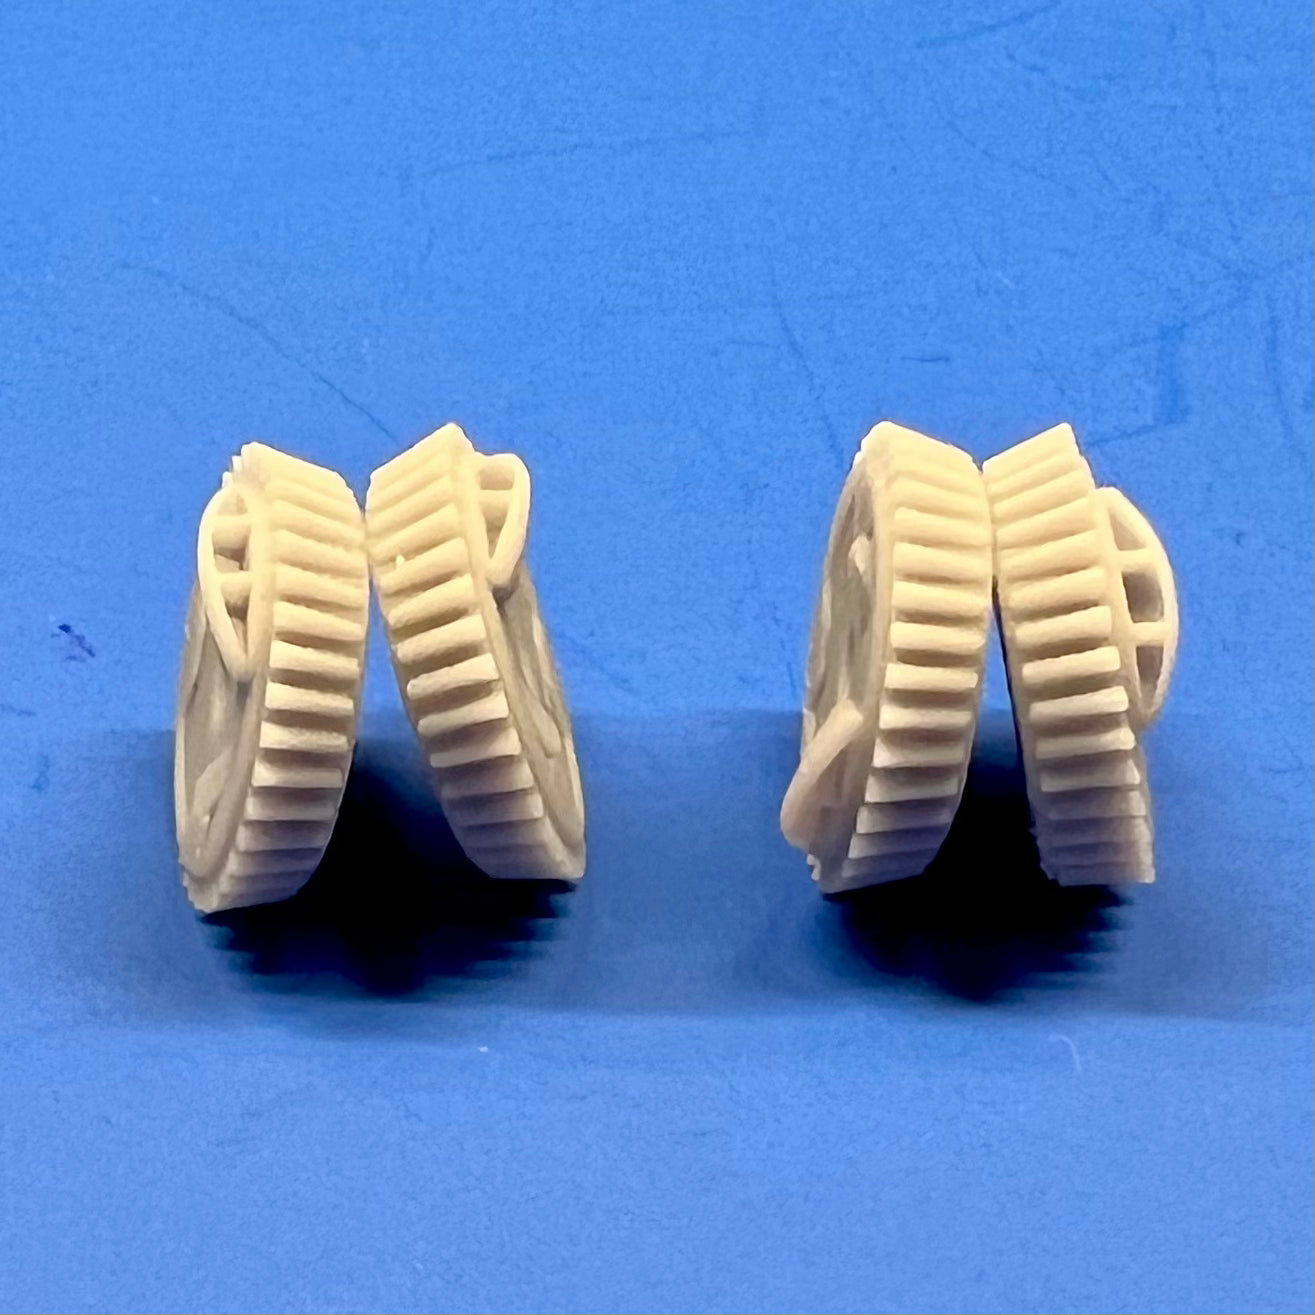 Buick Style Finned Disc Brake Covers Set 1/24 1/25